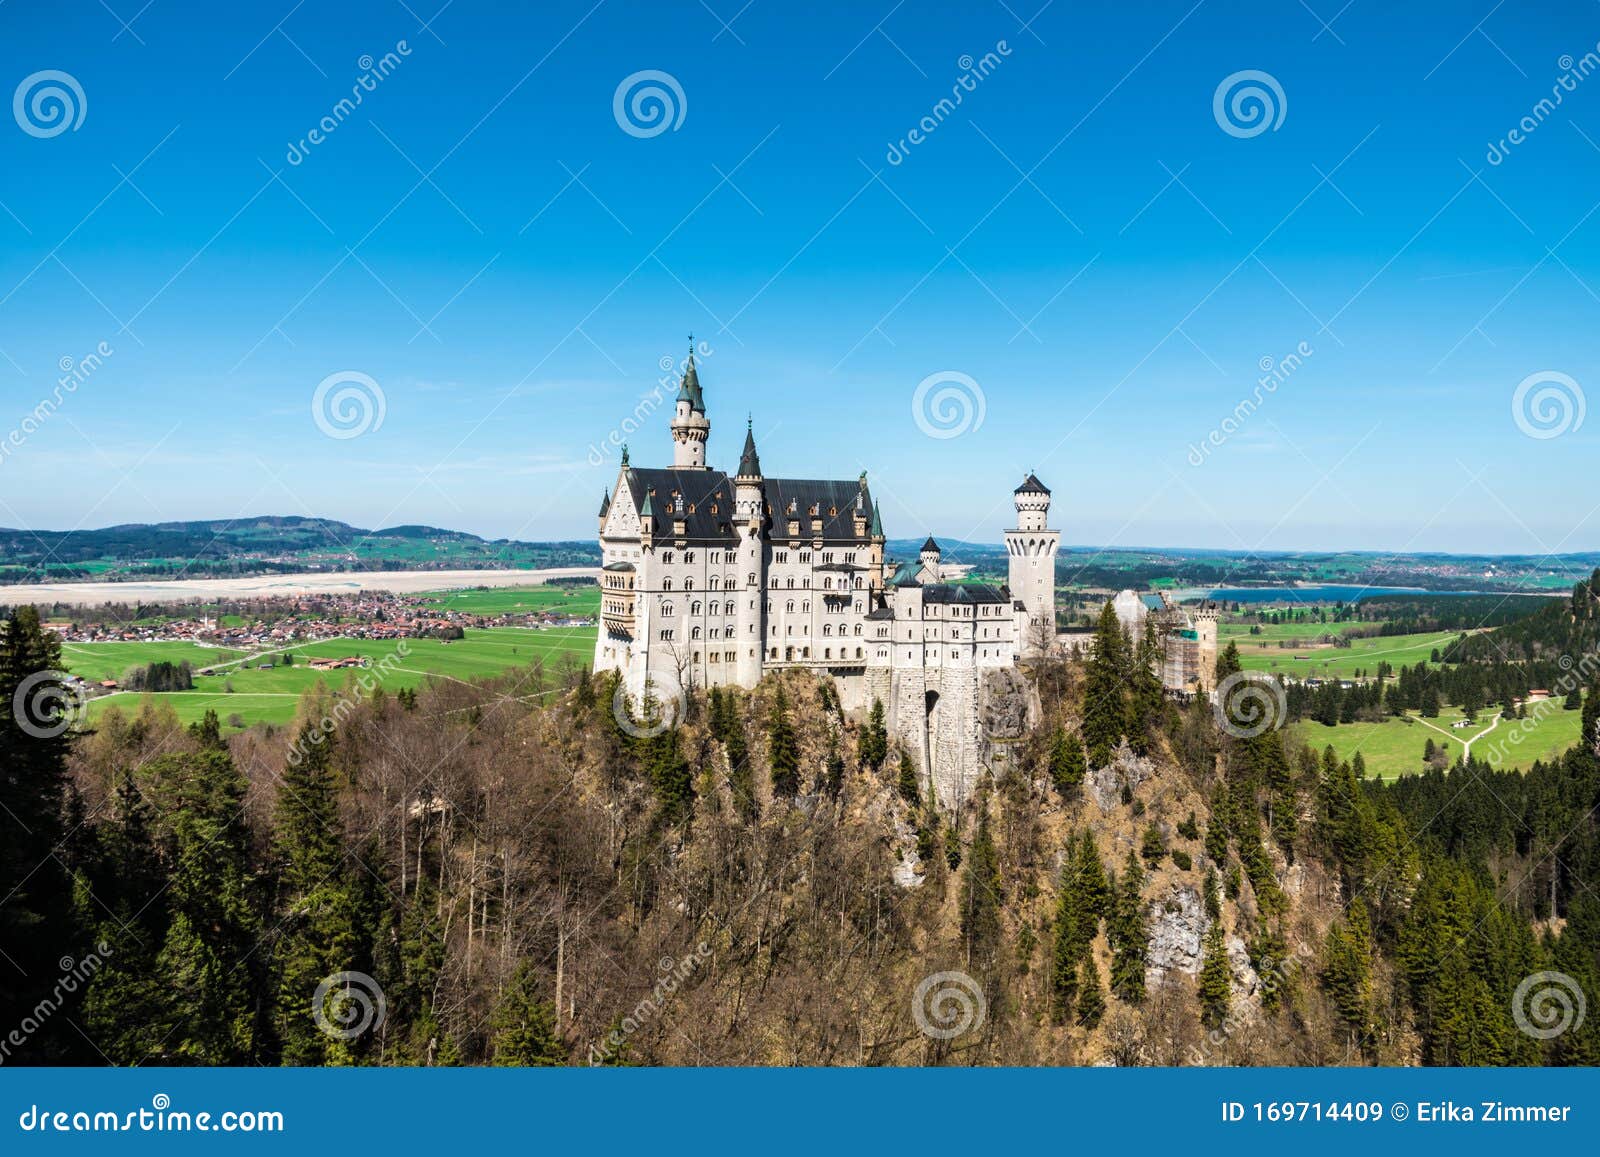 view of neuschwanstein castle and the surrounding landscape